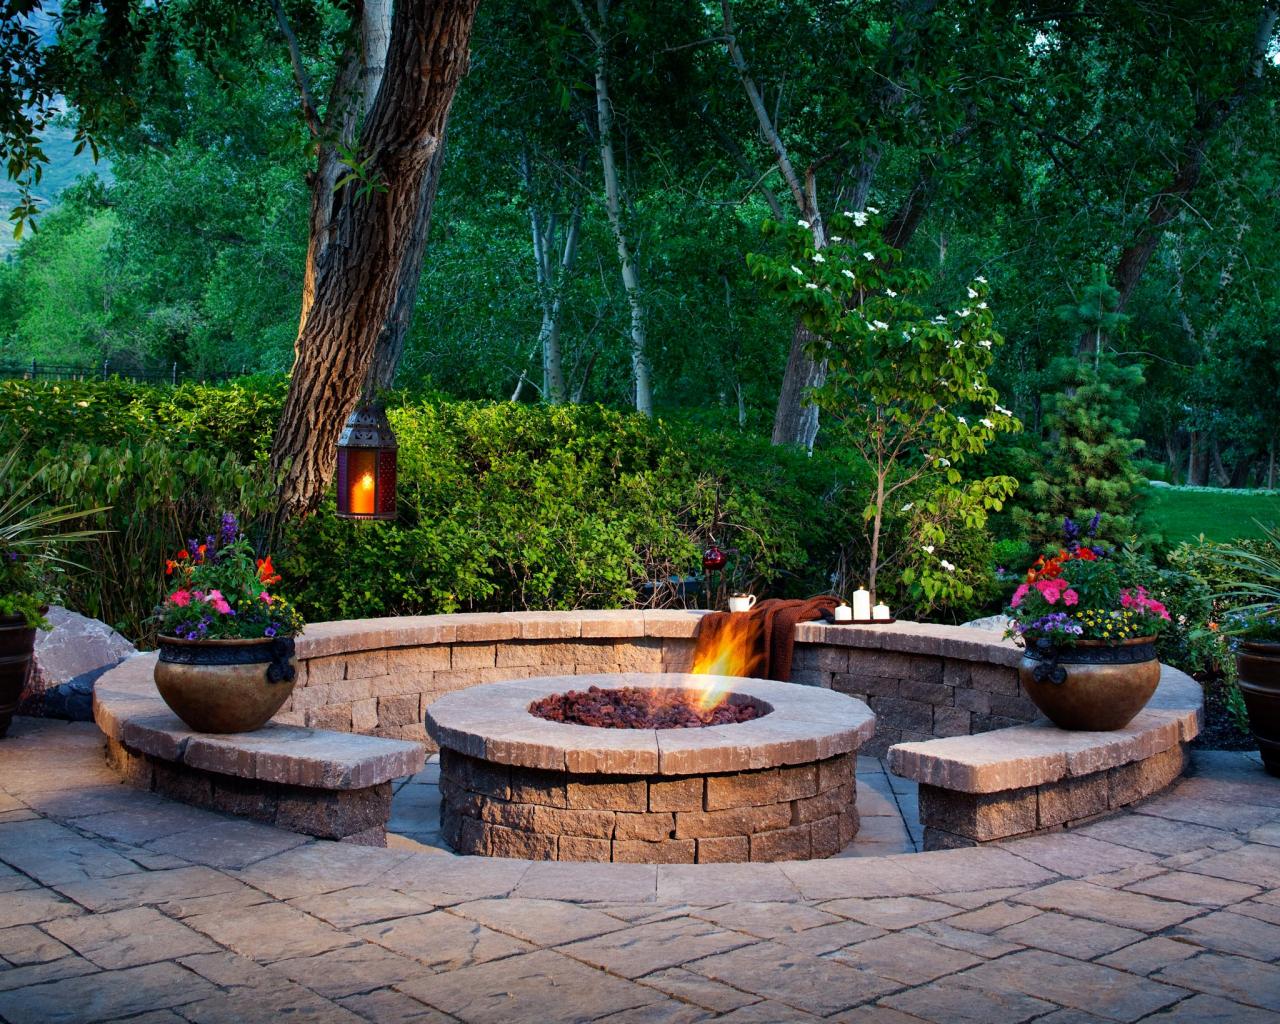 Designing A Patio Around Fire Pit Diy, Outdoor Fire Pit Height